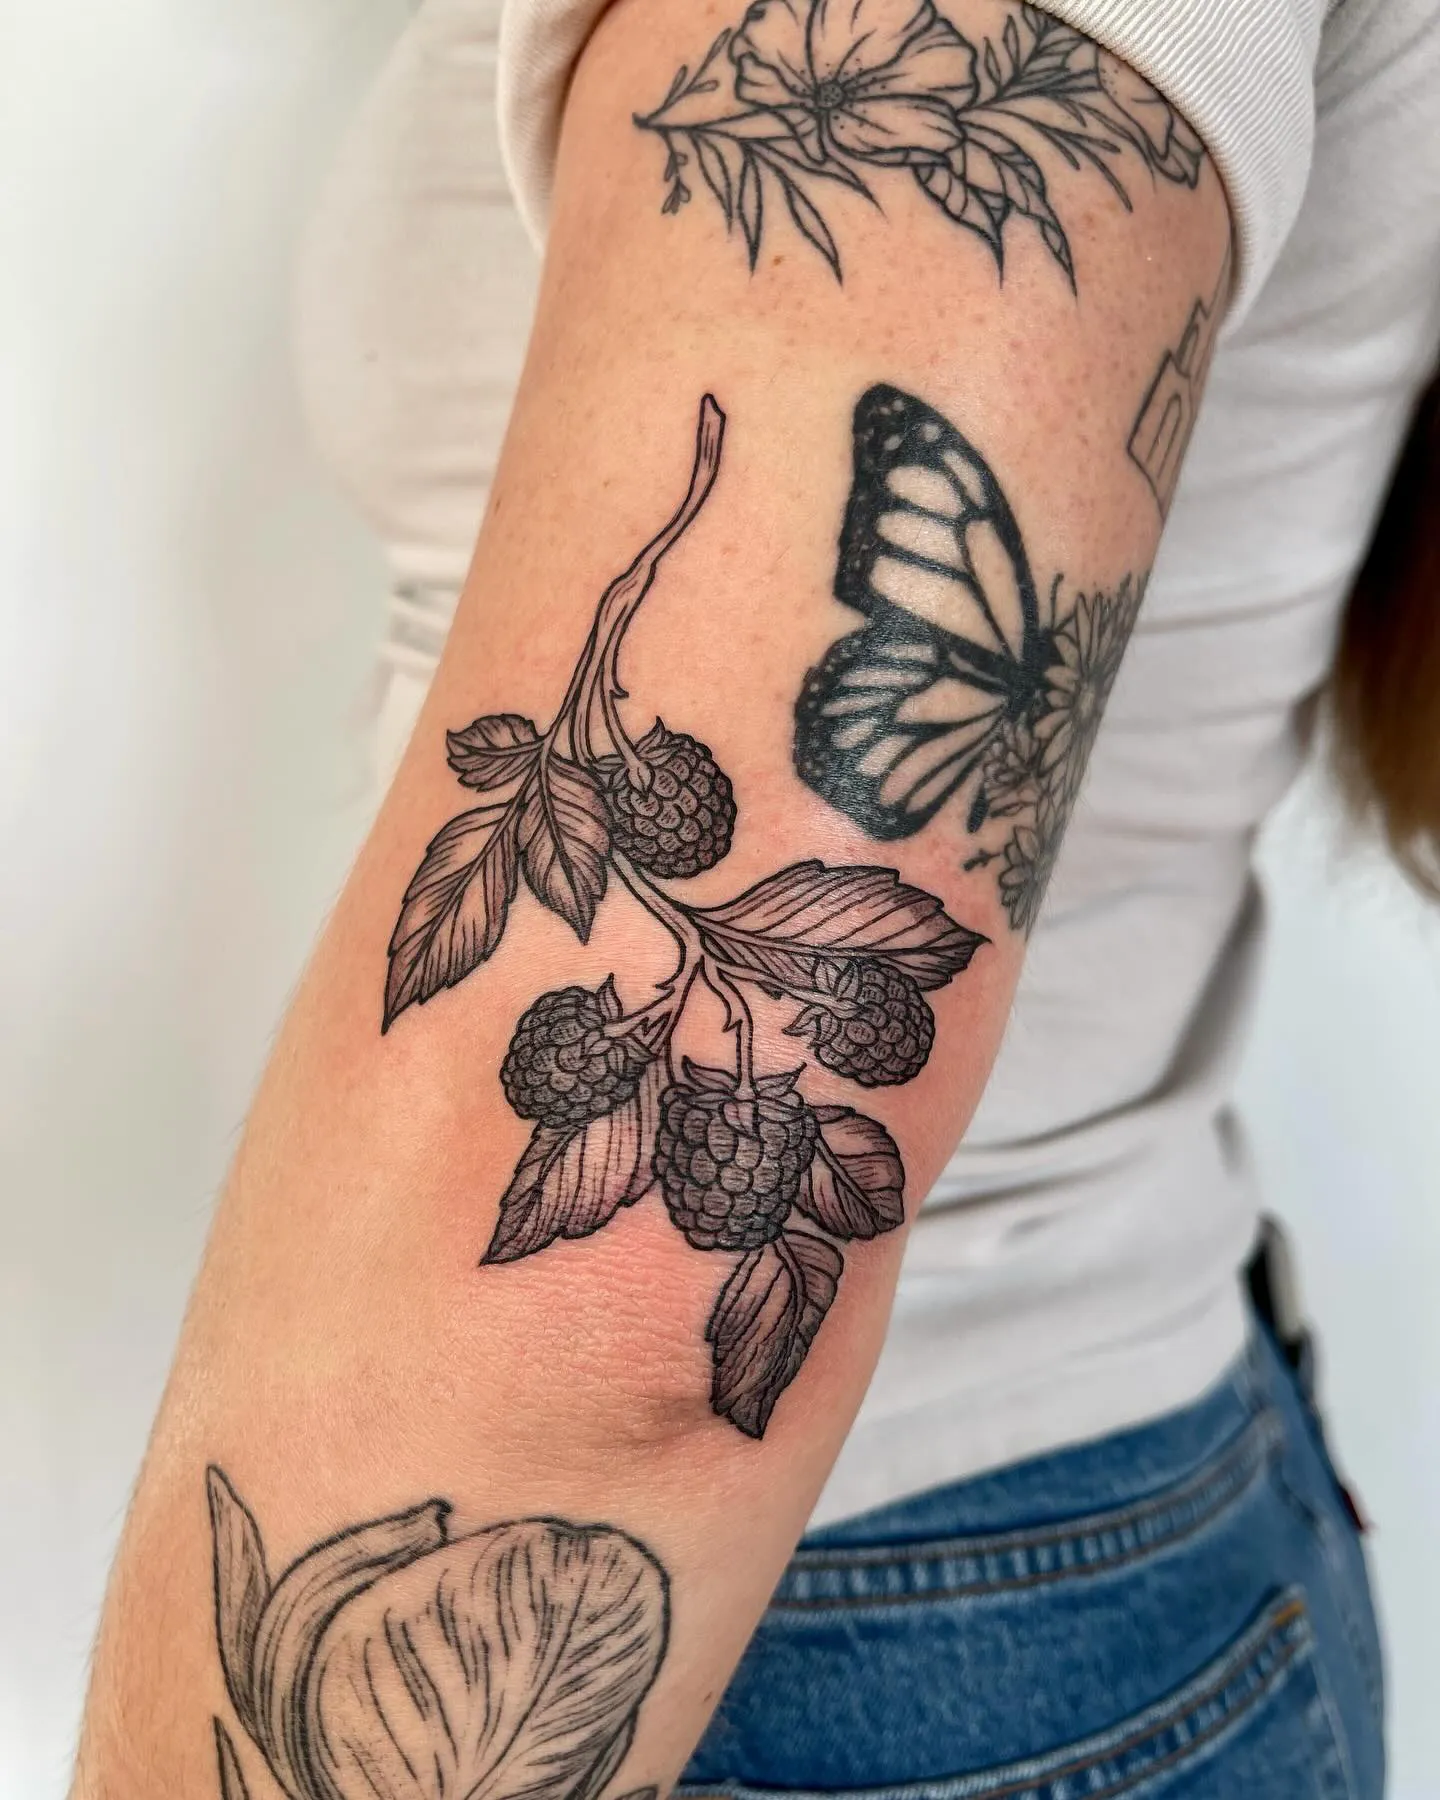 Forearm Blackberry Tattoo with Butterfly Companion